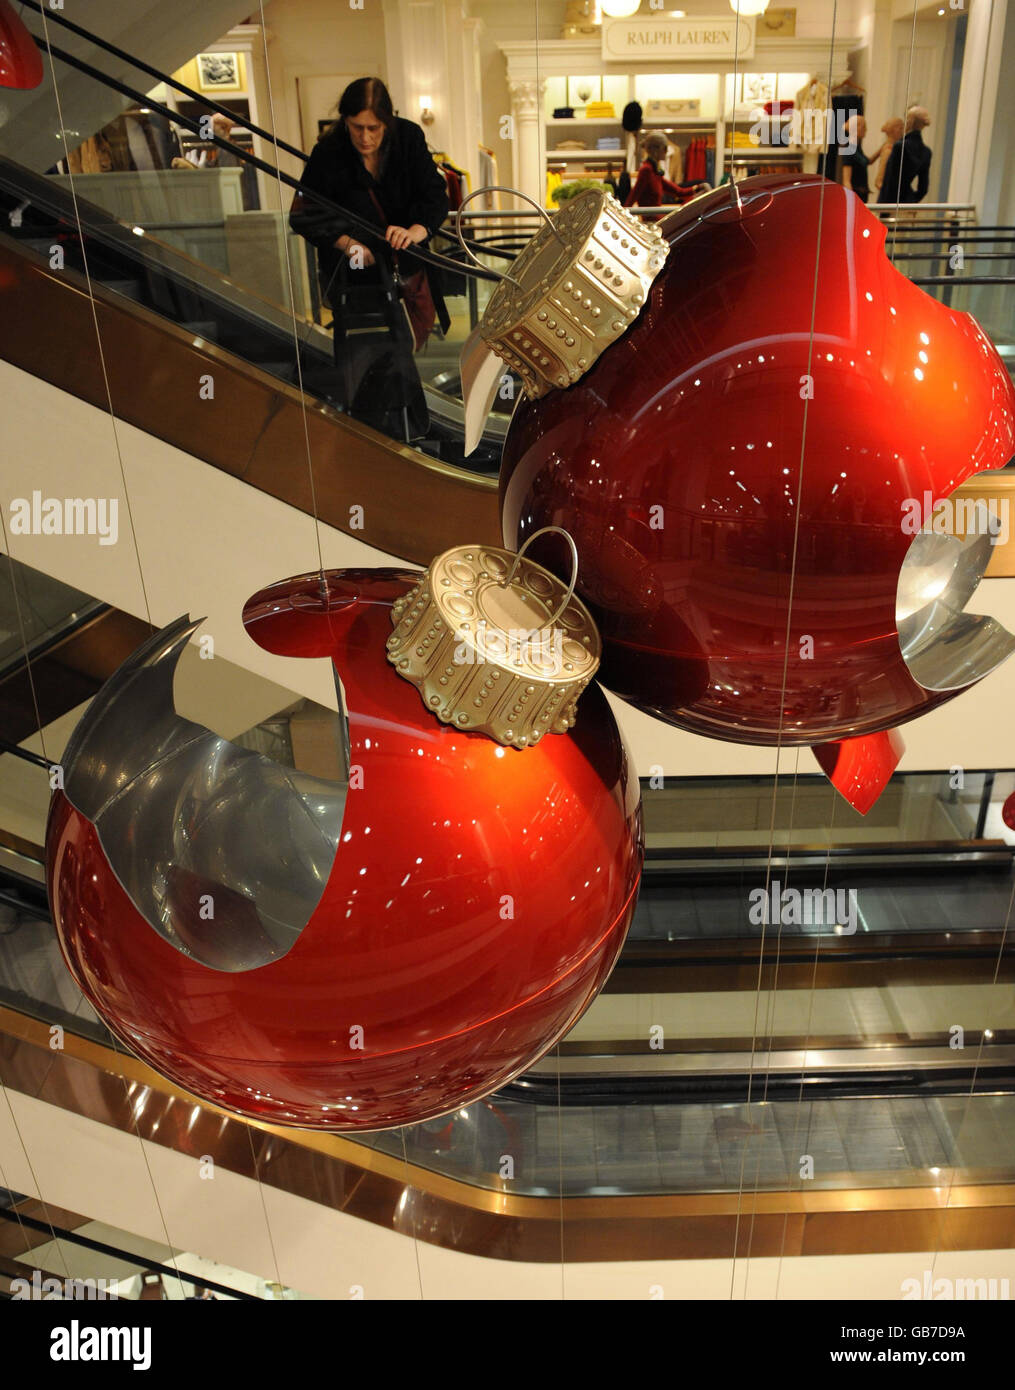 Giant red baubles in Selfridges department store in central London go on display. They are part of an artwork by Claire Morgan and form part of this year's Christmas decorations. Stock Photo